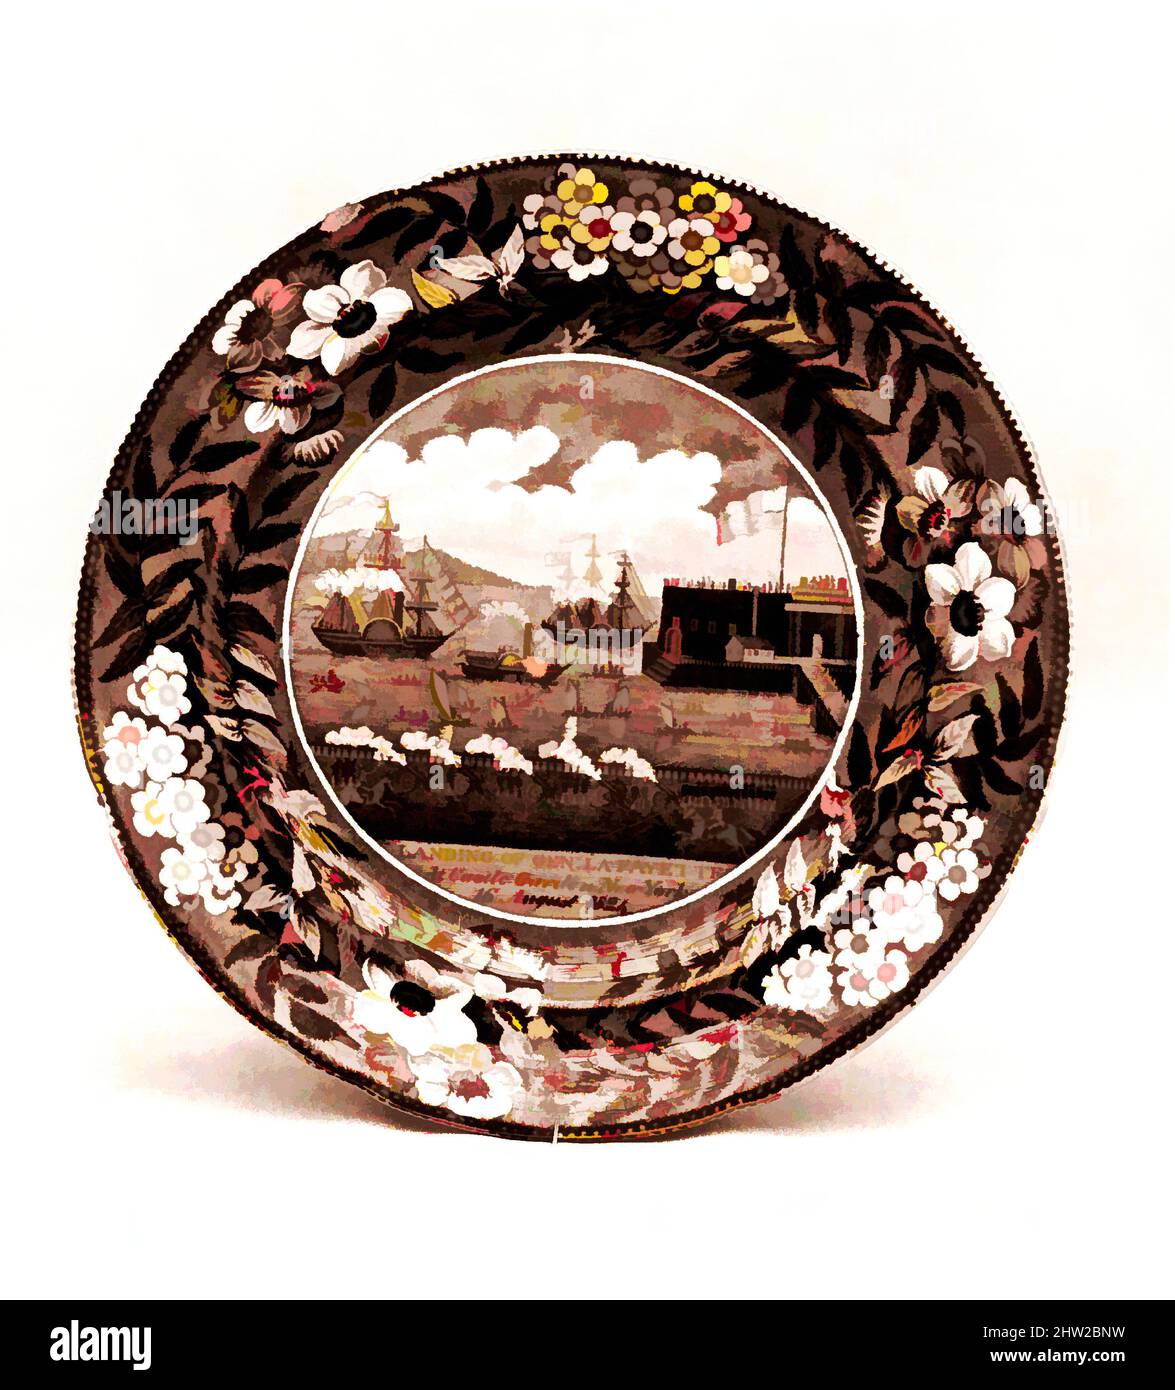 Art inspired by Plate, ca. 1824–34, Made in Staffordshire, Stoke-on-Trent, England, British (American market), Earthenware, transfer-printed, Diam. 10 in. (25.4 cm), Ceramics, James and Ralph Clews (British, Cobridge, Stoke-on-Trent, active ca. 1818–36), This blue and white transfer-, Classic works modernized by Artotop with a splash of modernity. Shapes, color and value, eye-catching visual impact on art. Emotions through freedom of artworks in a contemporary way. A timeless message pursuing a wildly creative new direction. Artists turning to the digital medium and creating the Artotop NFT Stock Photo